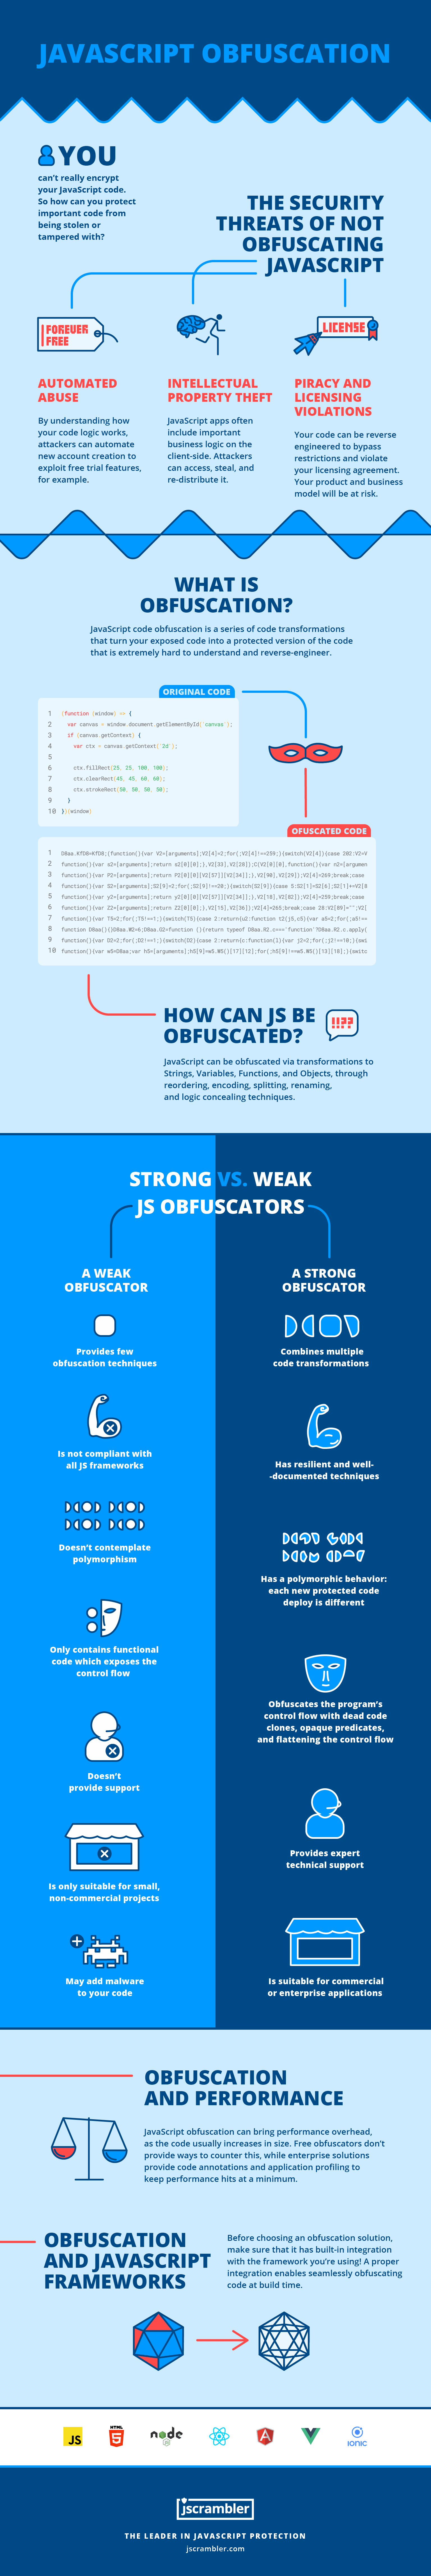 Understanding-JavaScript-Obfuscation-and-obfuscators-infographic